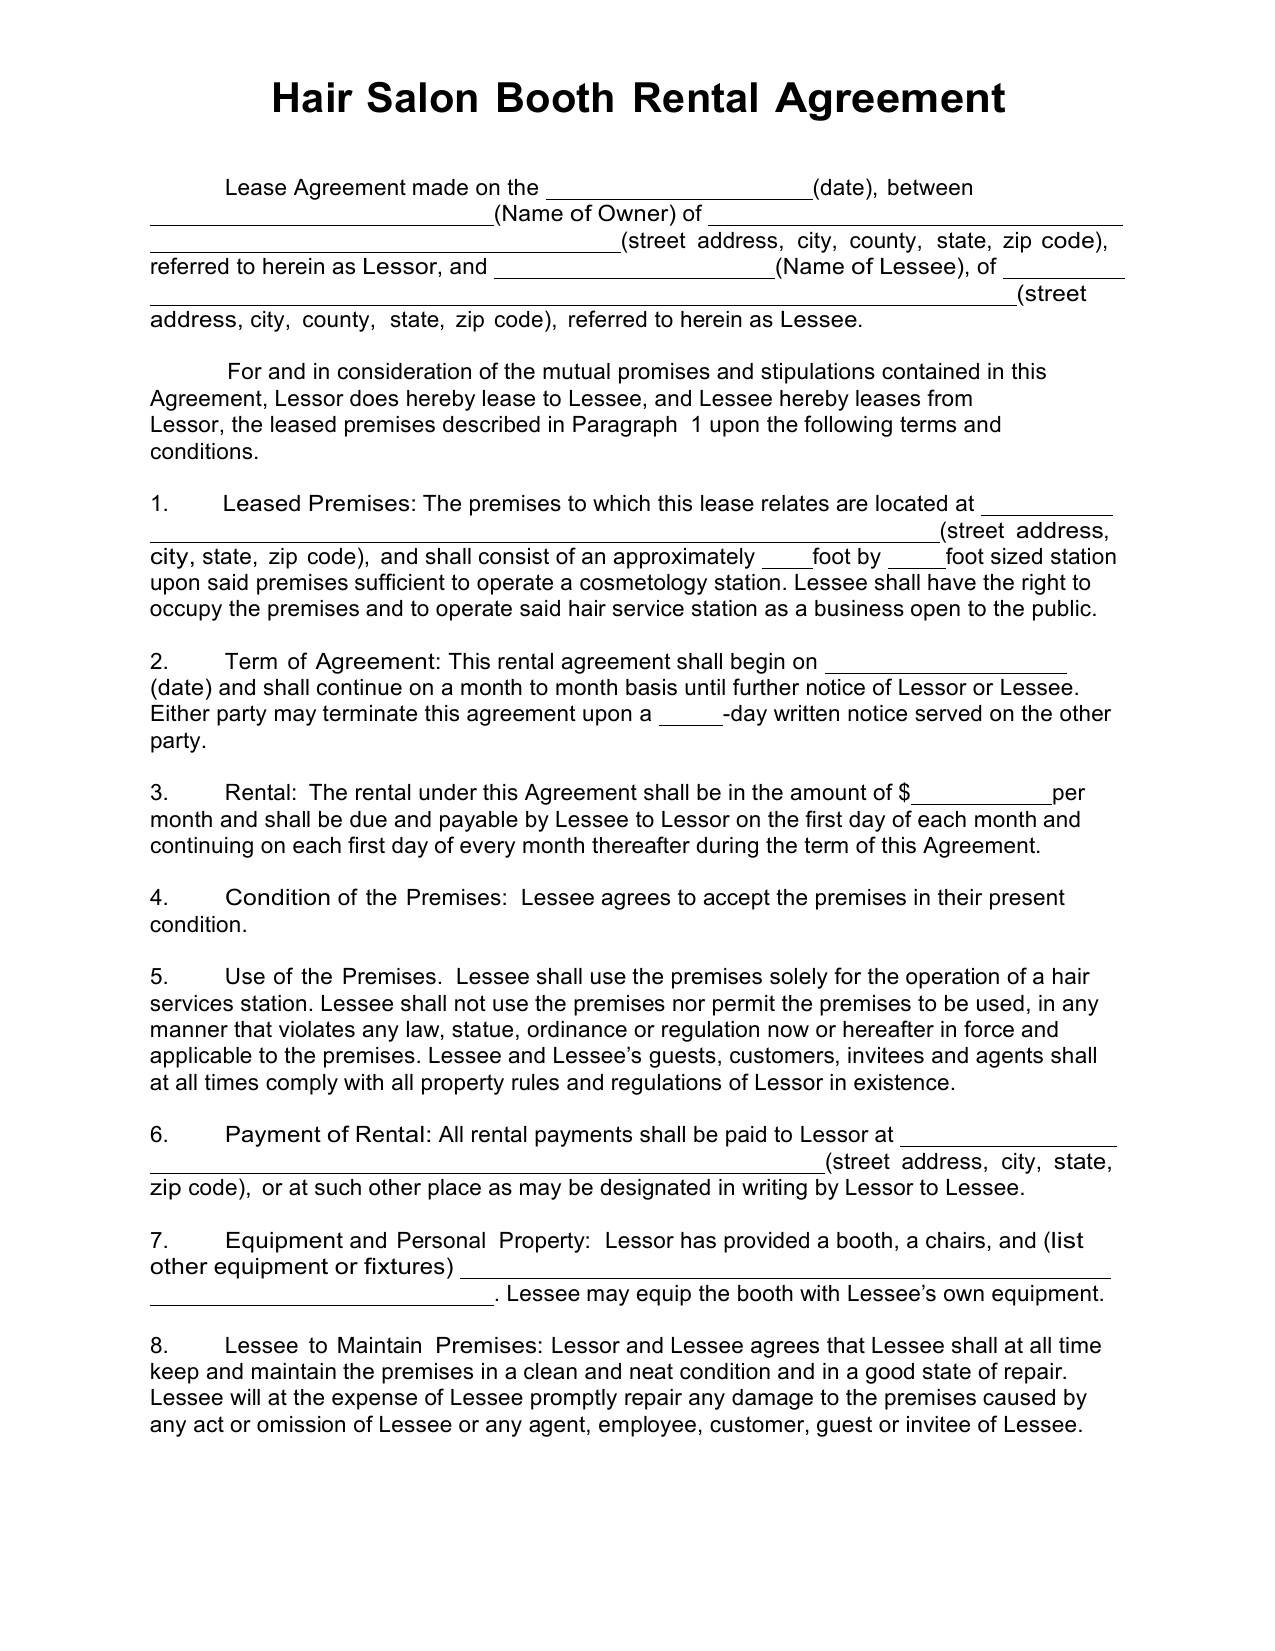 Download Salon Booth Rental Lease Agreement Template